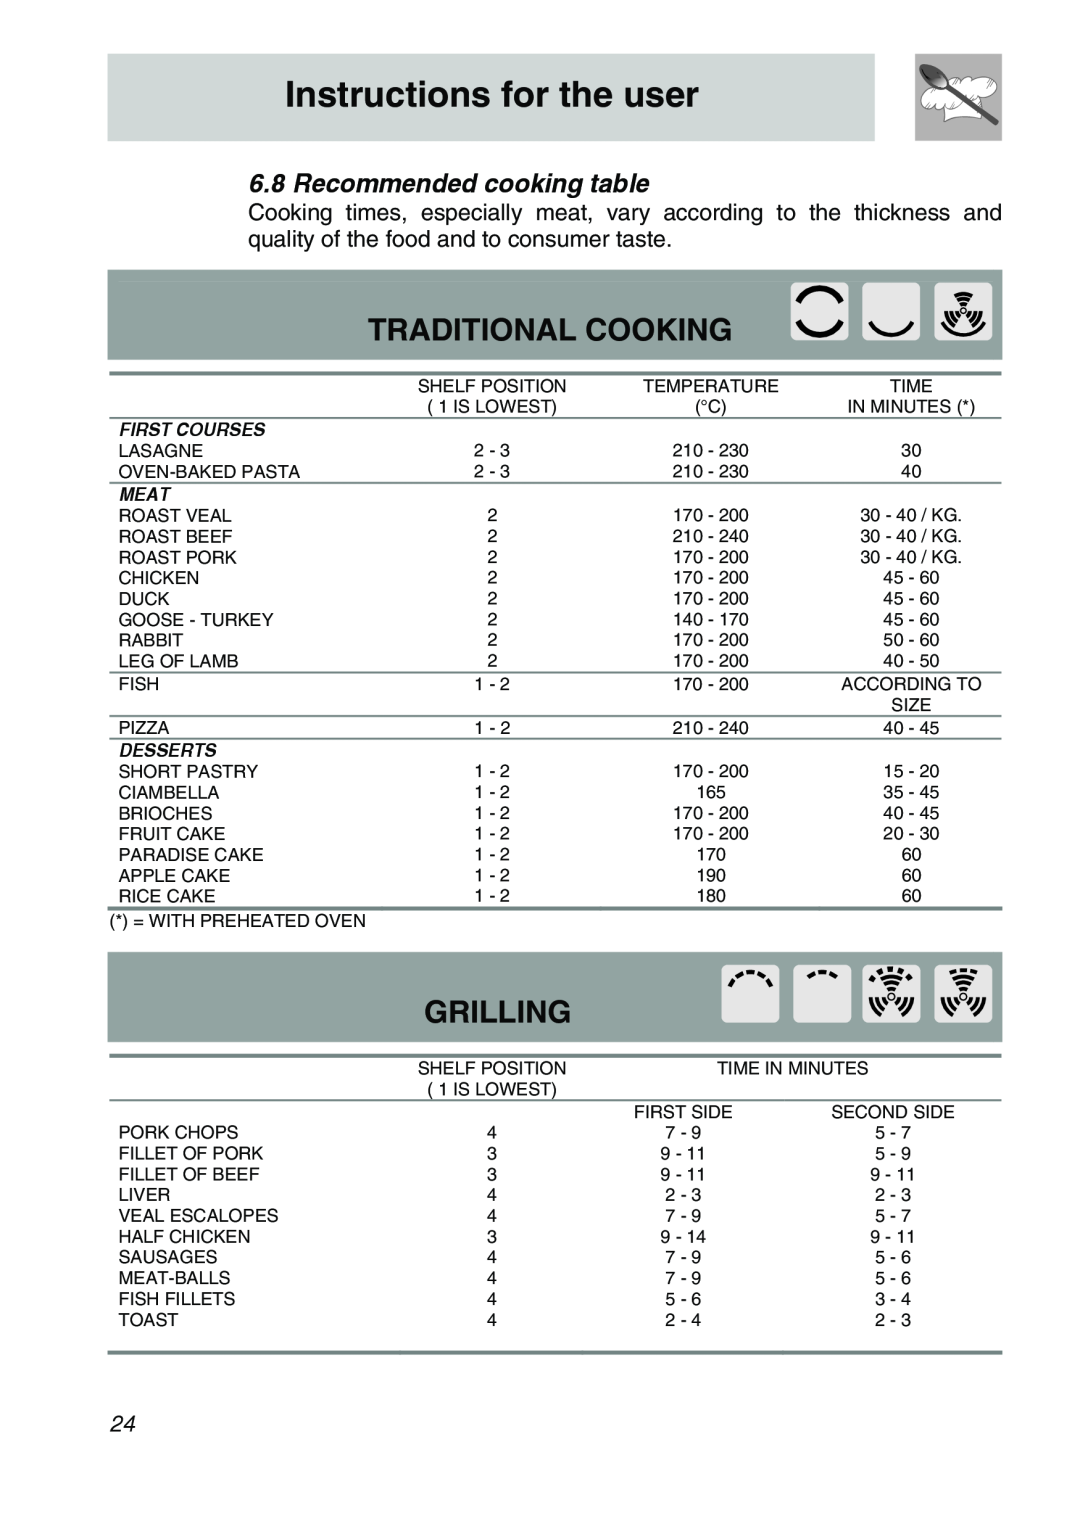 Smeg SA707X-7 Traditional Cooking, Grilling, Recommended cooking table, Instructions for the user, First Courses, Meat 